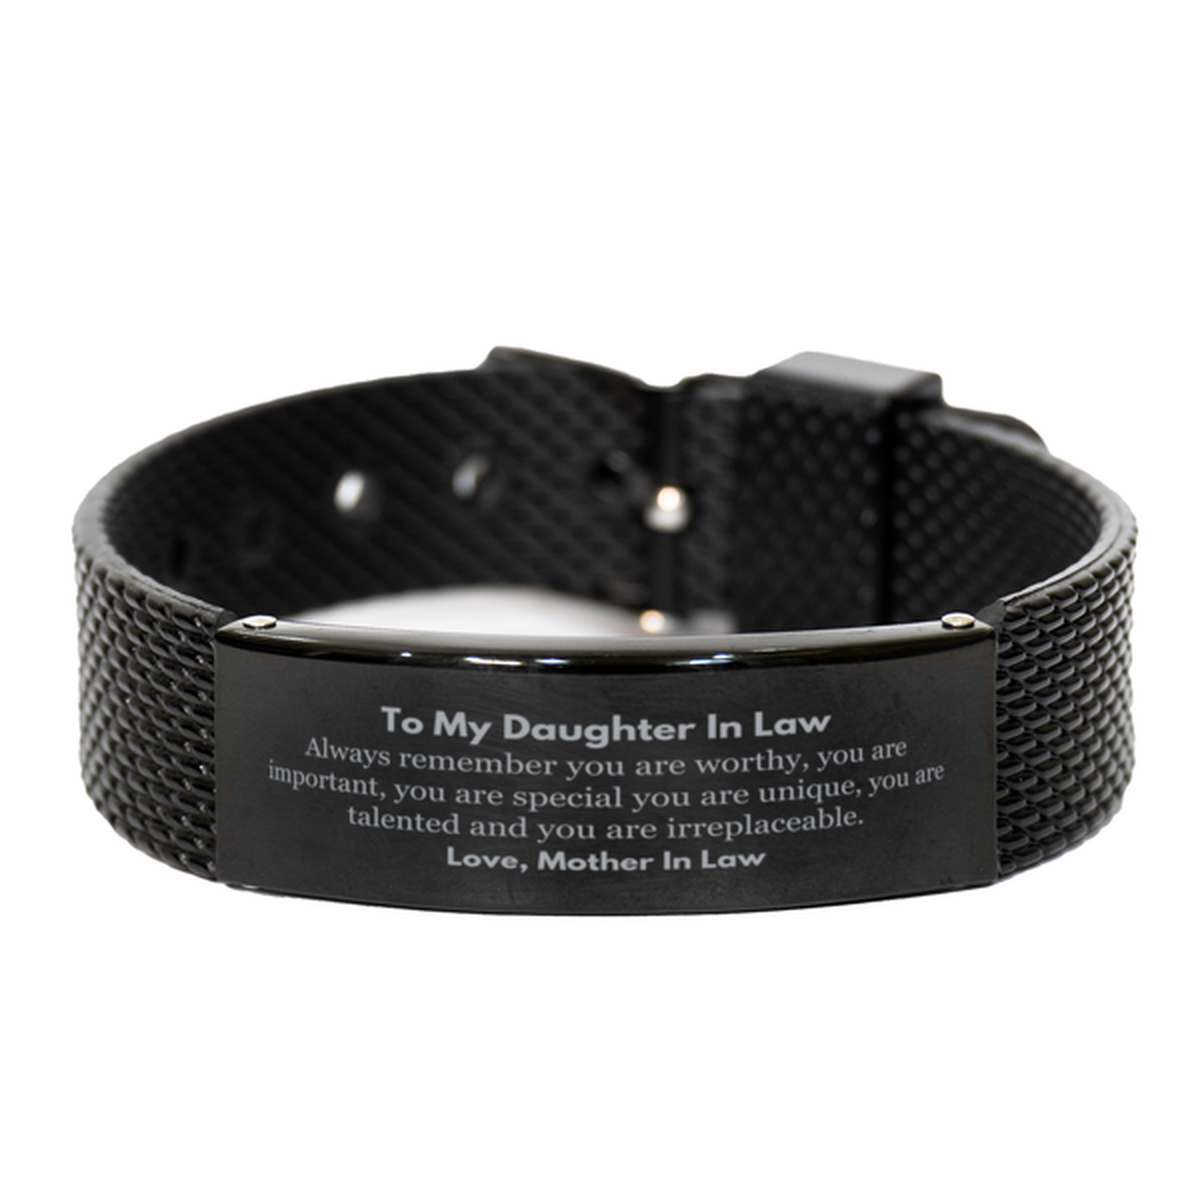 Daughter In Law Birthday Gifts from Mother In Law, Inspirational Black Shark Mesh Bracelet for Daughter In Law Christmas Graduation Gifts for Daughter In Law Always remember you are worthy, you are important. Love, Mother In Law